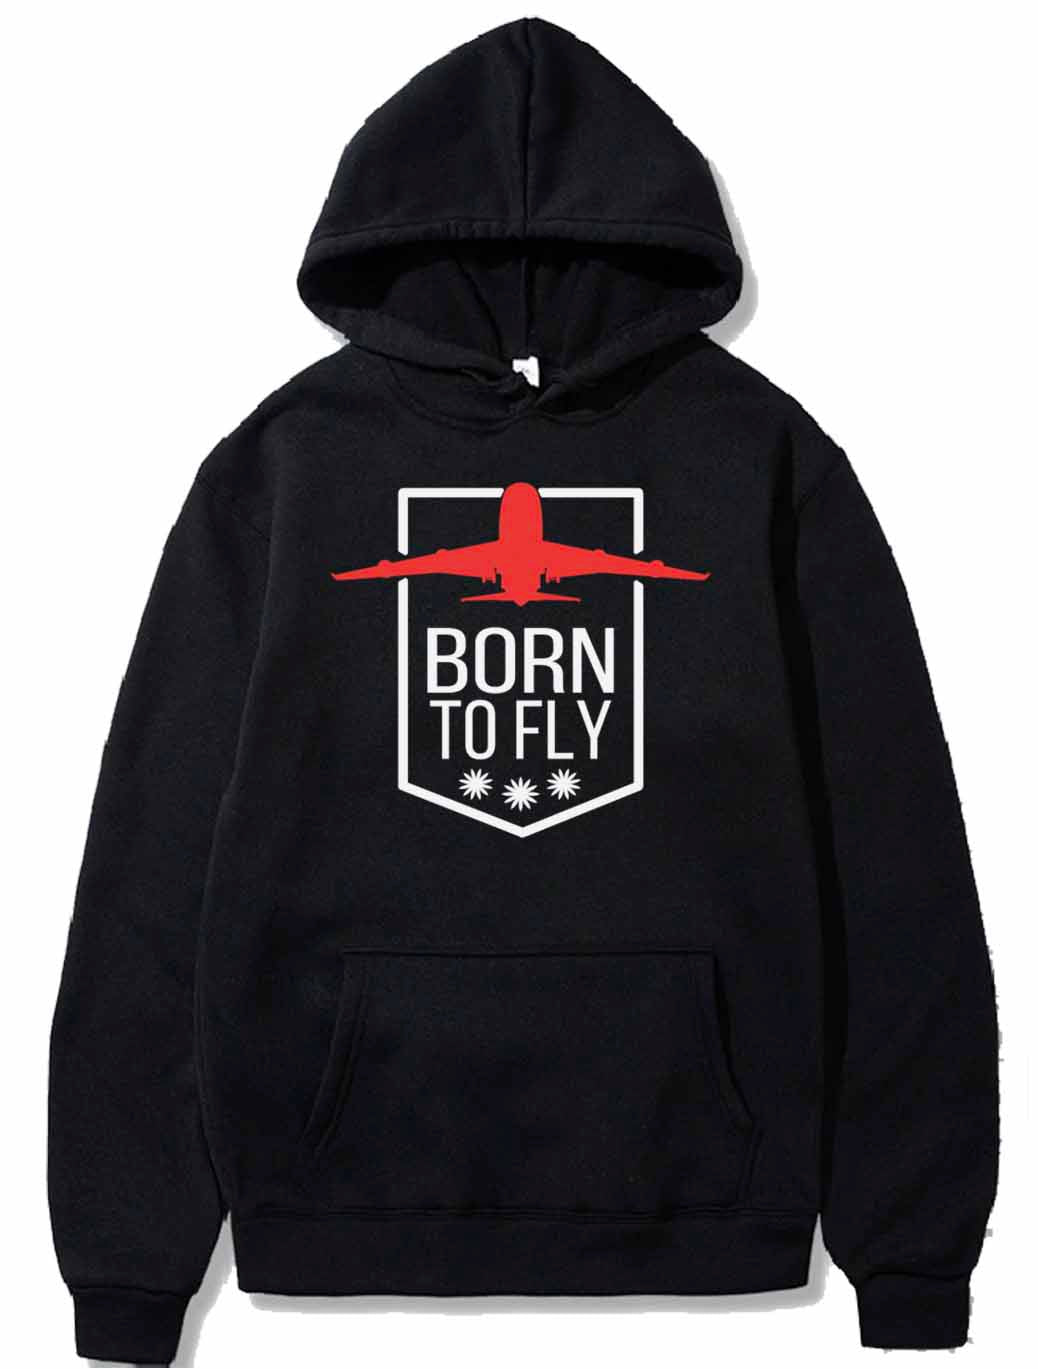 Airplane - Born to fly. PULLOVER THE AV8R